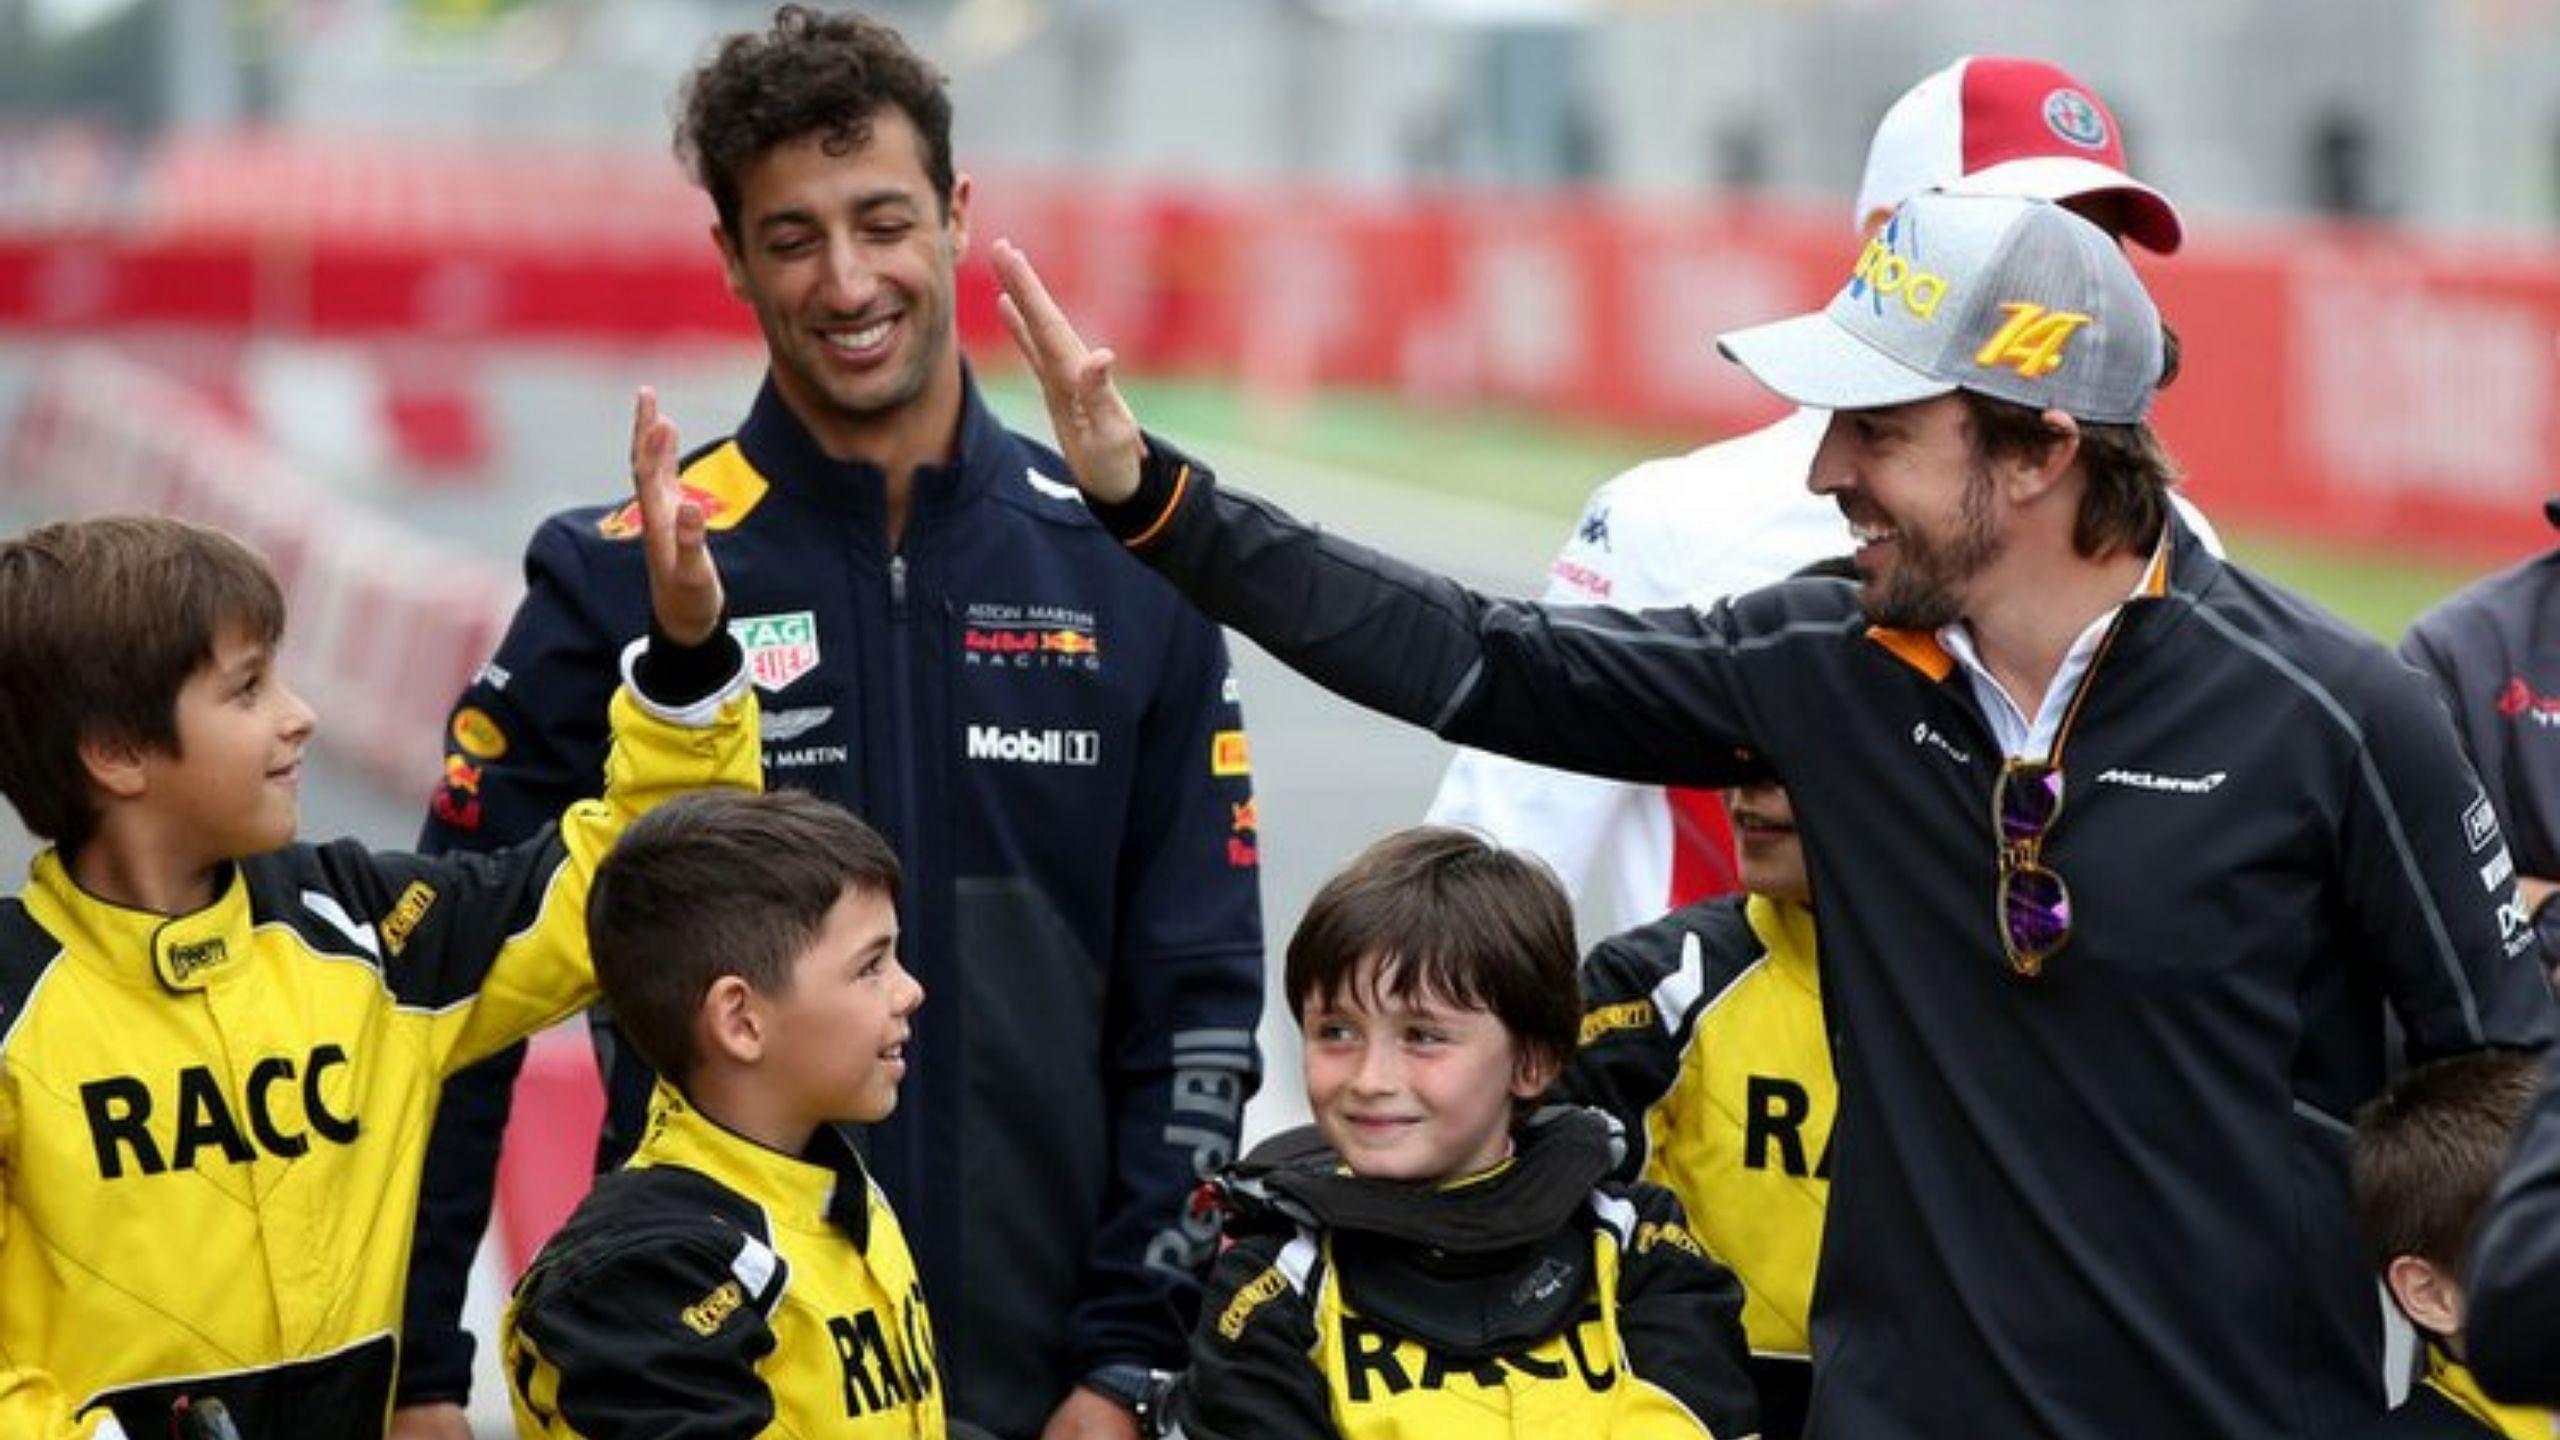 “It sounds sweet!” - Daniel Ricciardo mightily impressed with Fernando Alonso and his 2005 title-winning Renault R25 V10